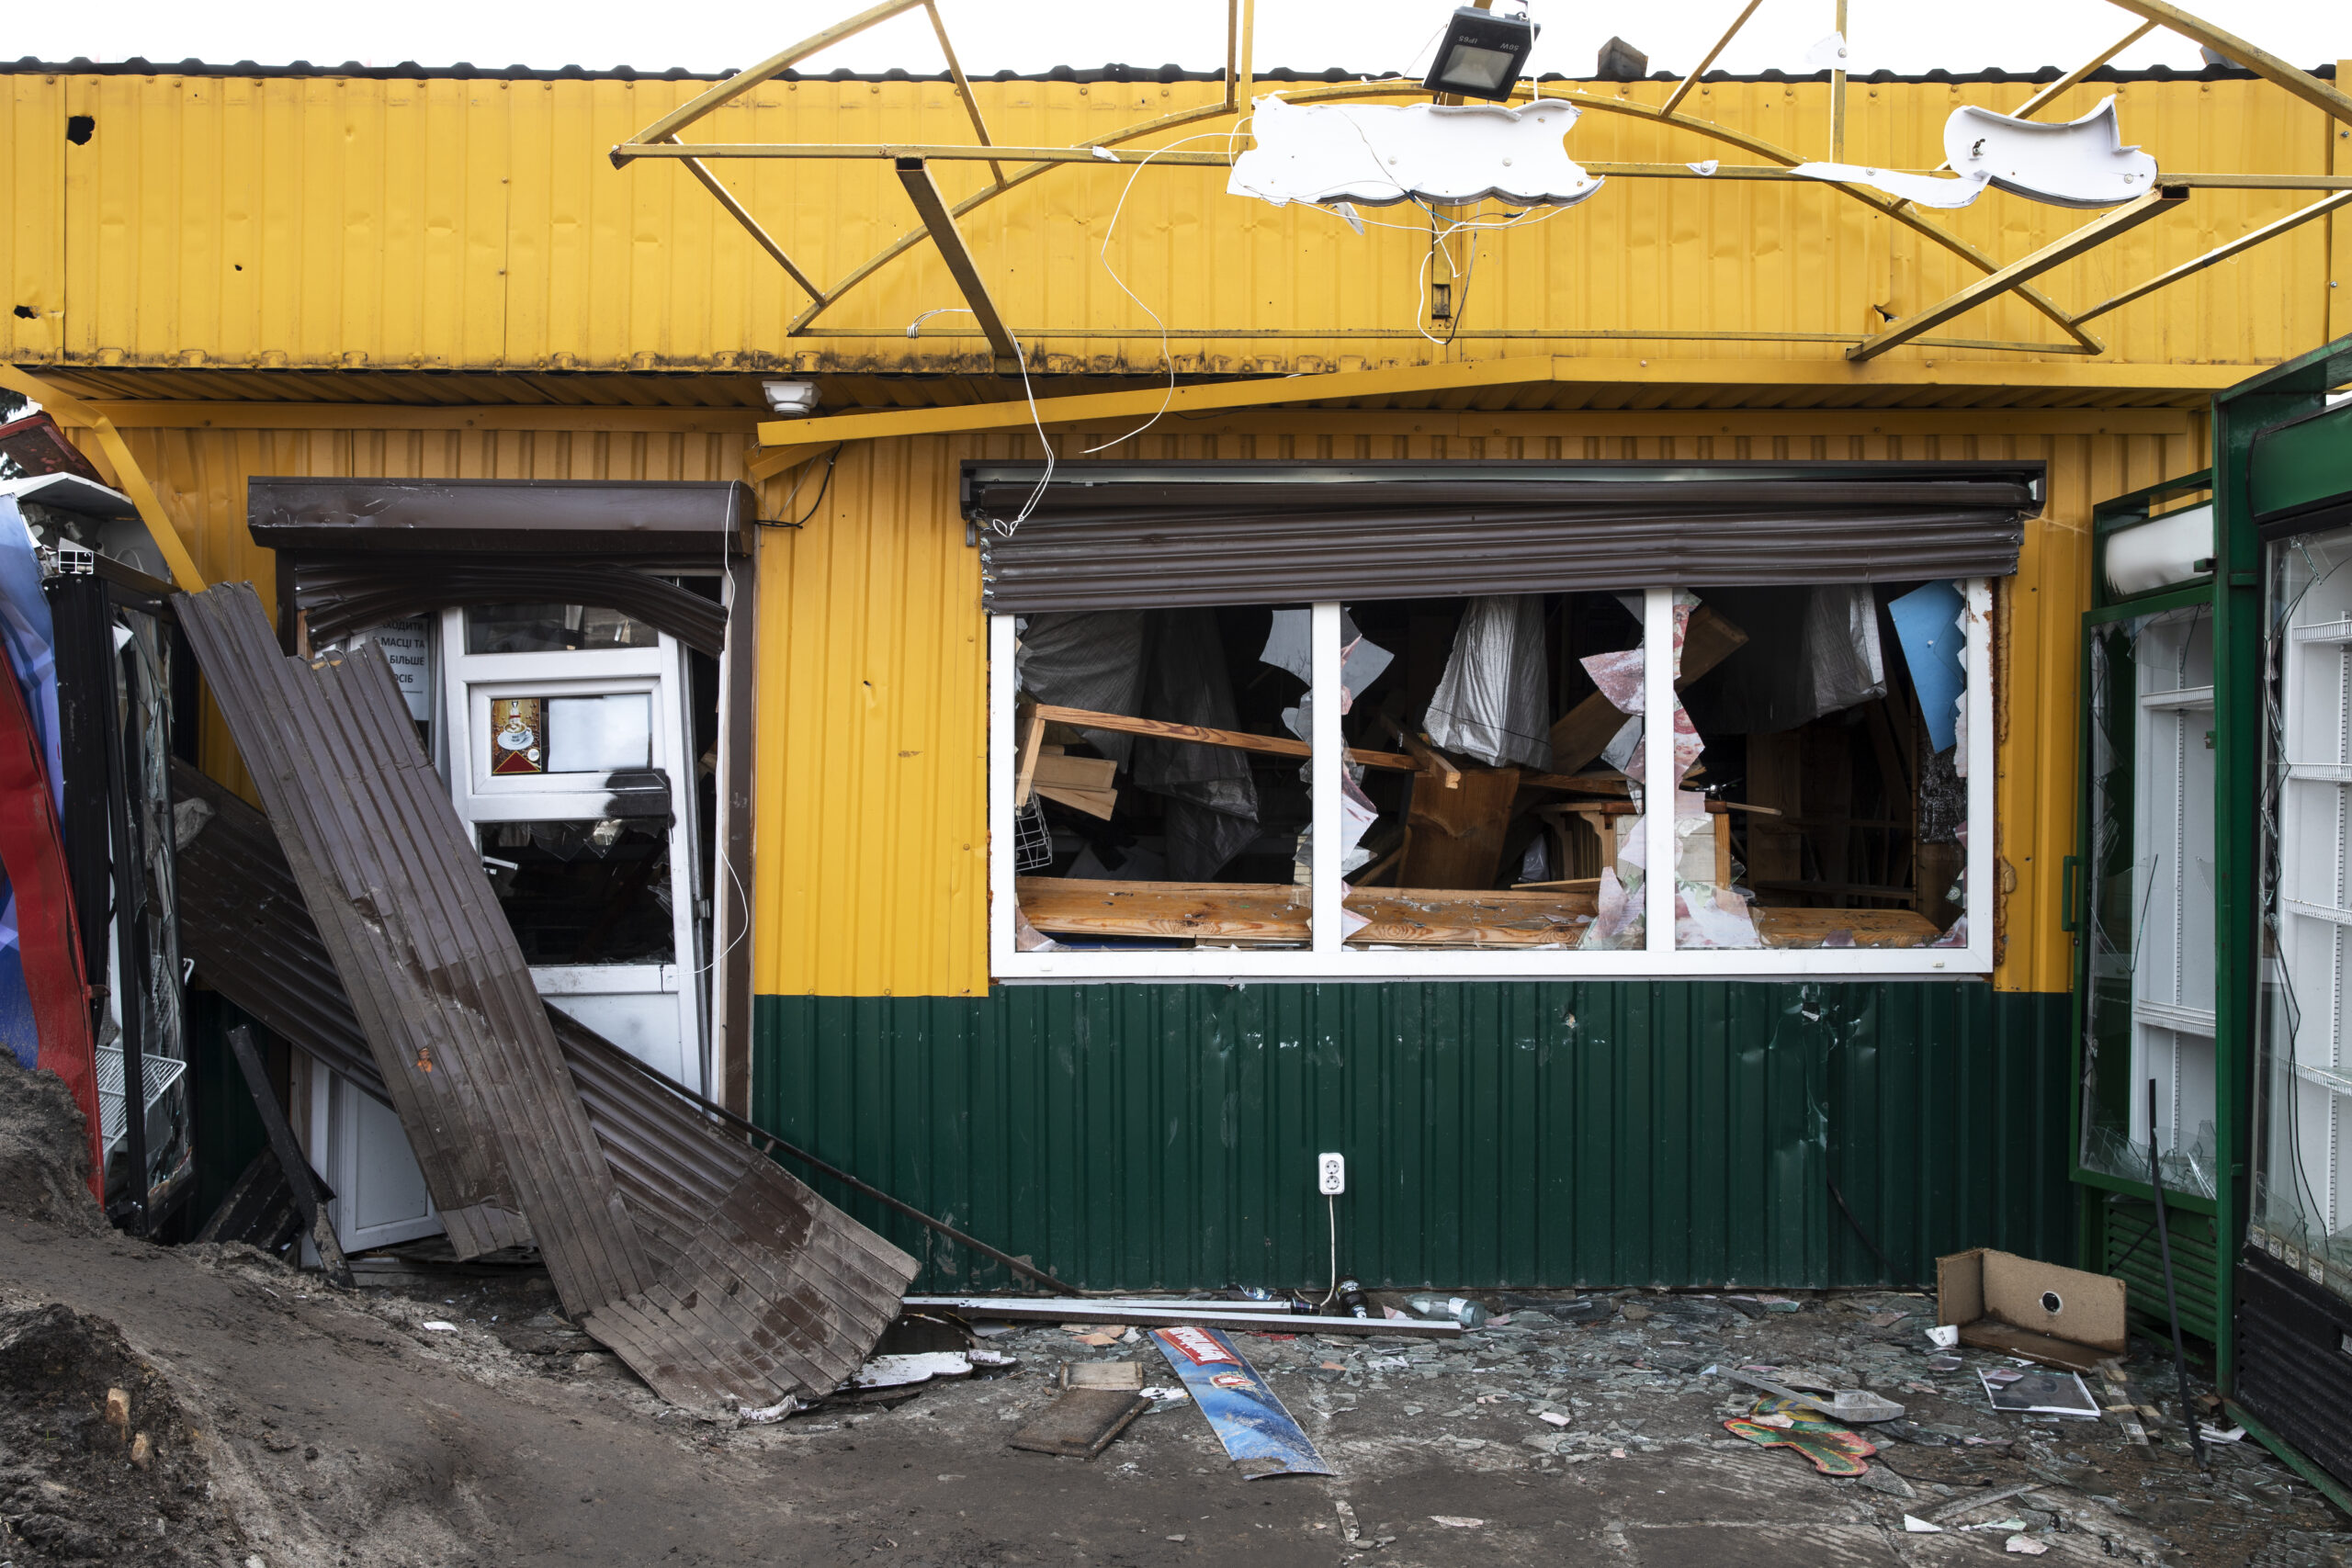 Damaged underinsured yellow and green shop, with broken windows, twisted iron, glass on ground